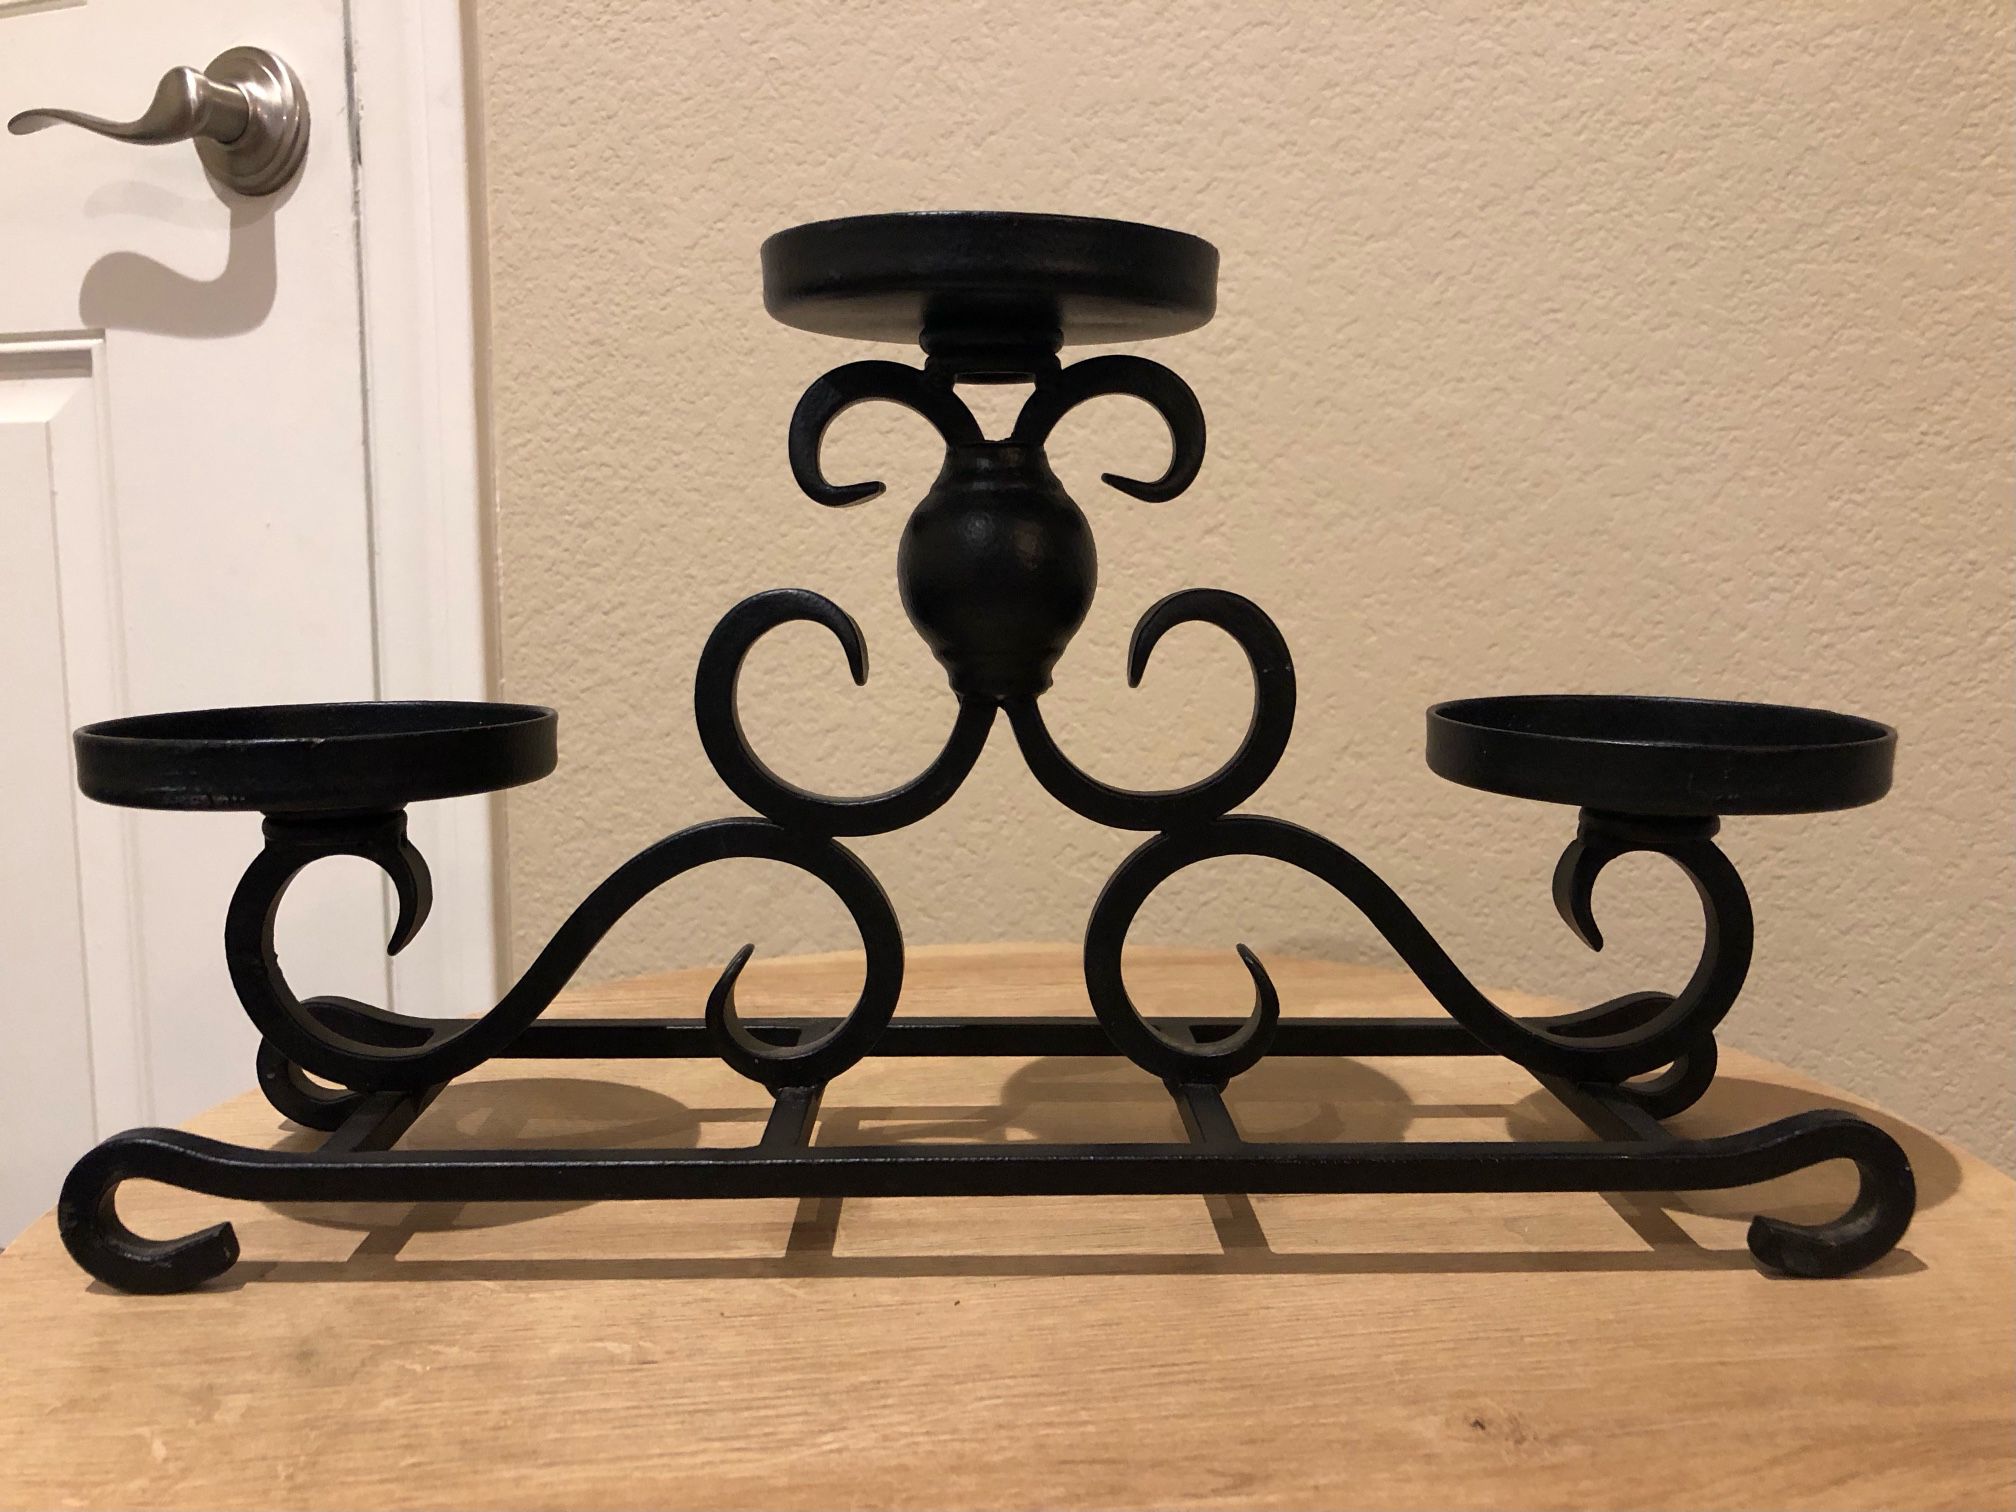 3 Tiered Candle Holder